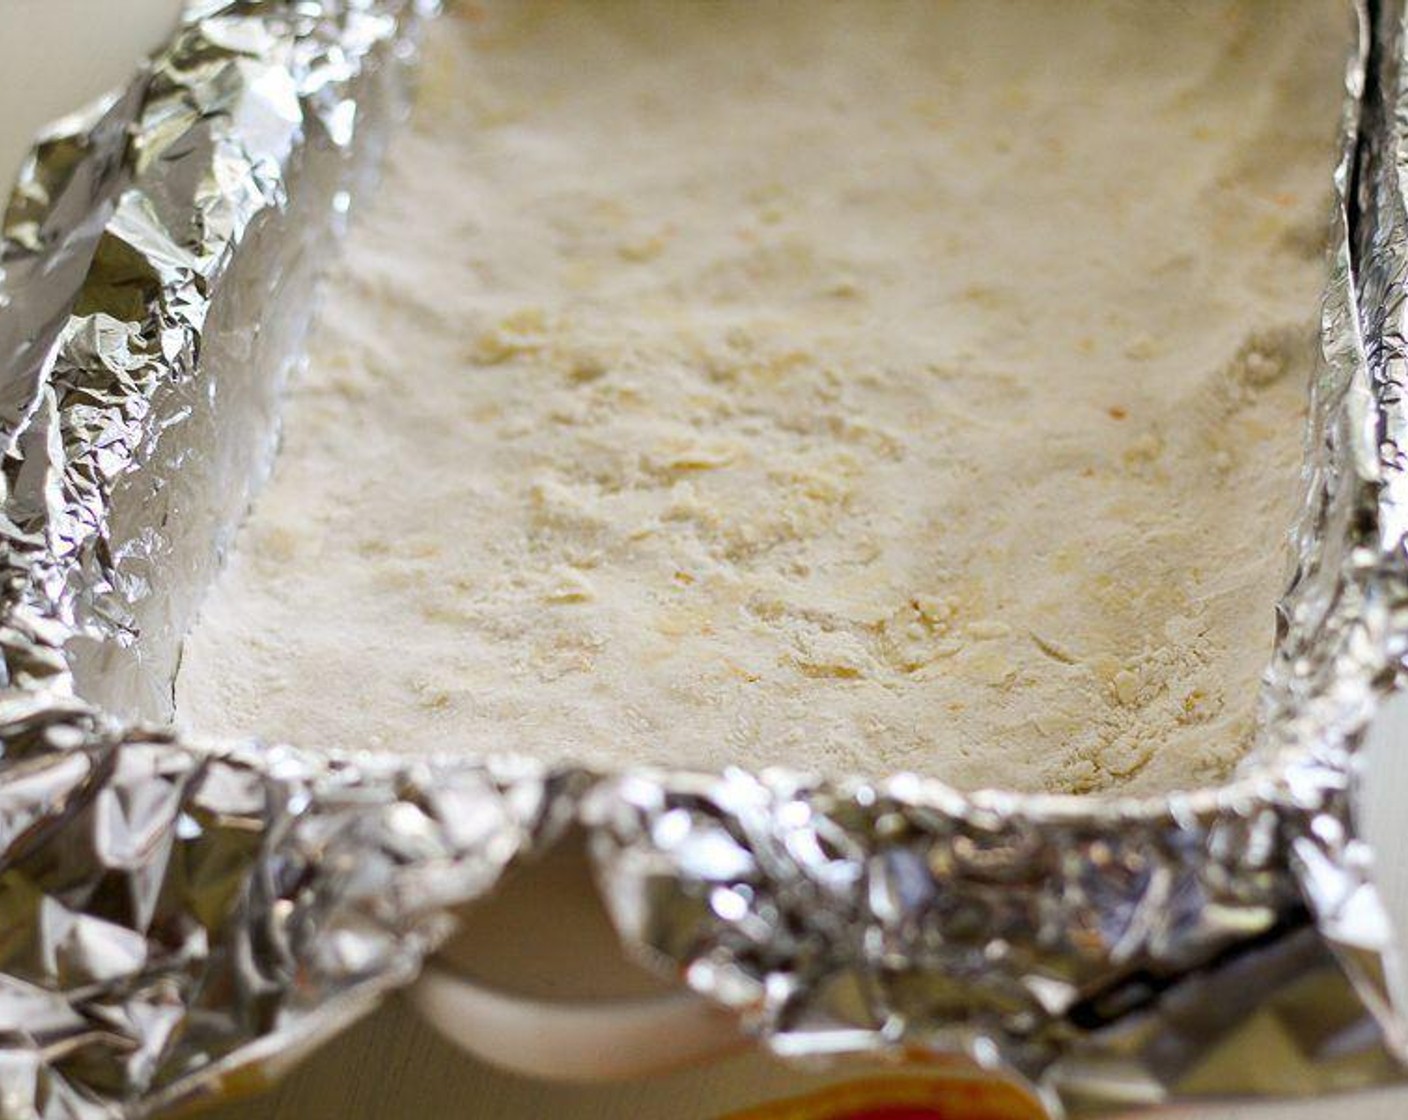 step 4 Press the crust mix into the bottom of the prepared pan. Bake for 15 minutes. Remove and set aside.